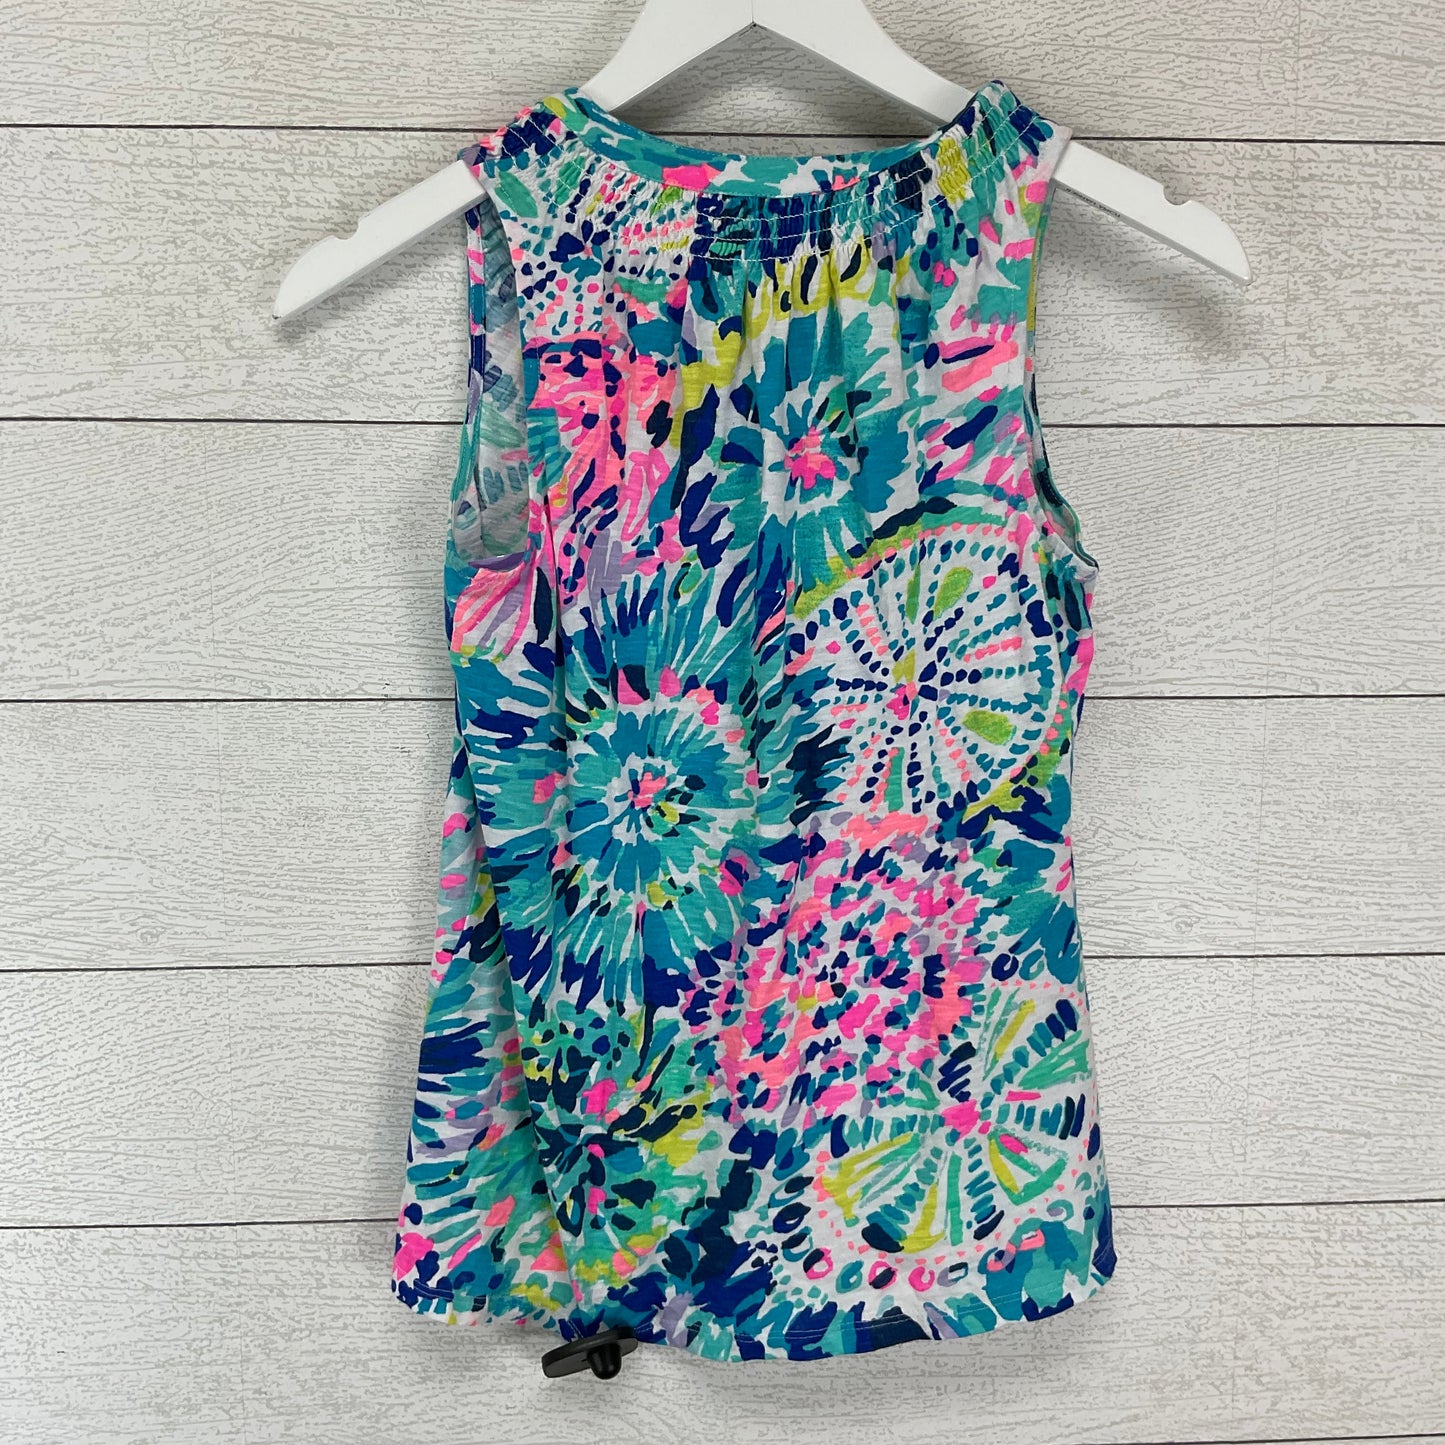 Top Sleeveless Designer By Lilly Pulitzer  Size: Xxs